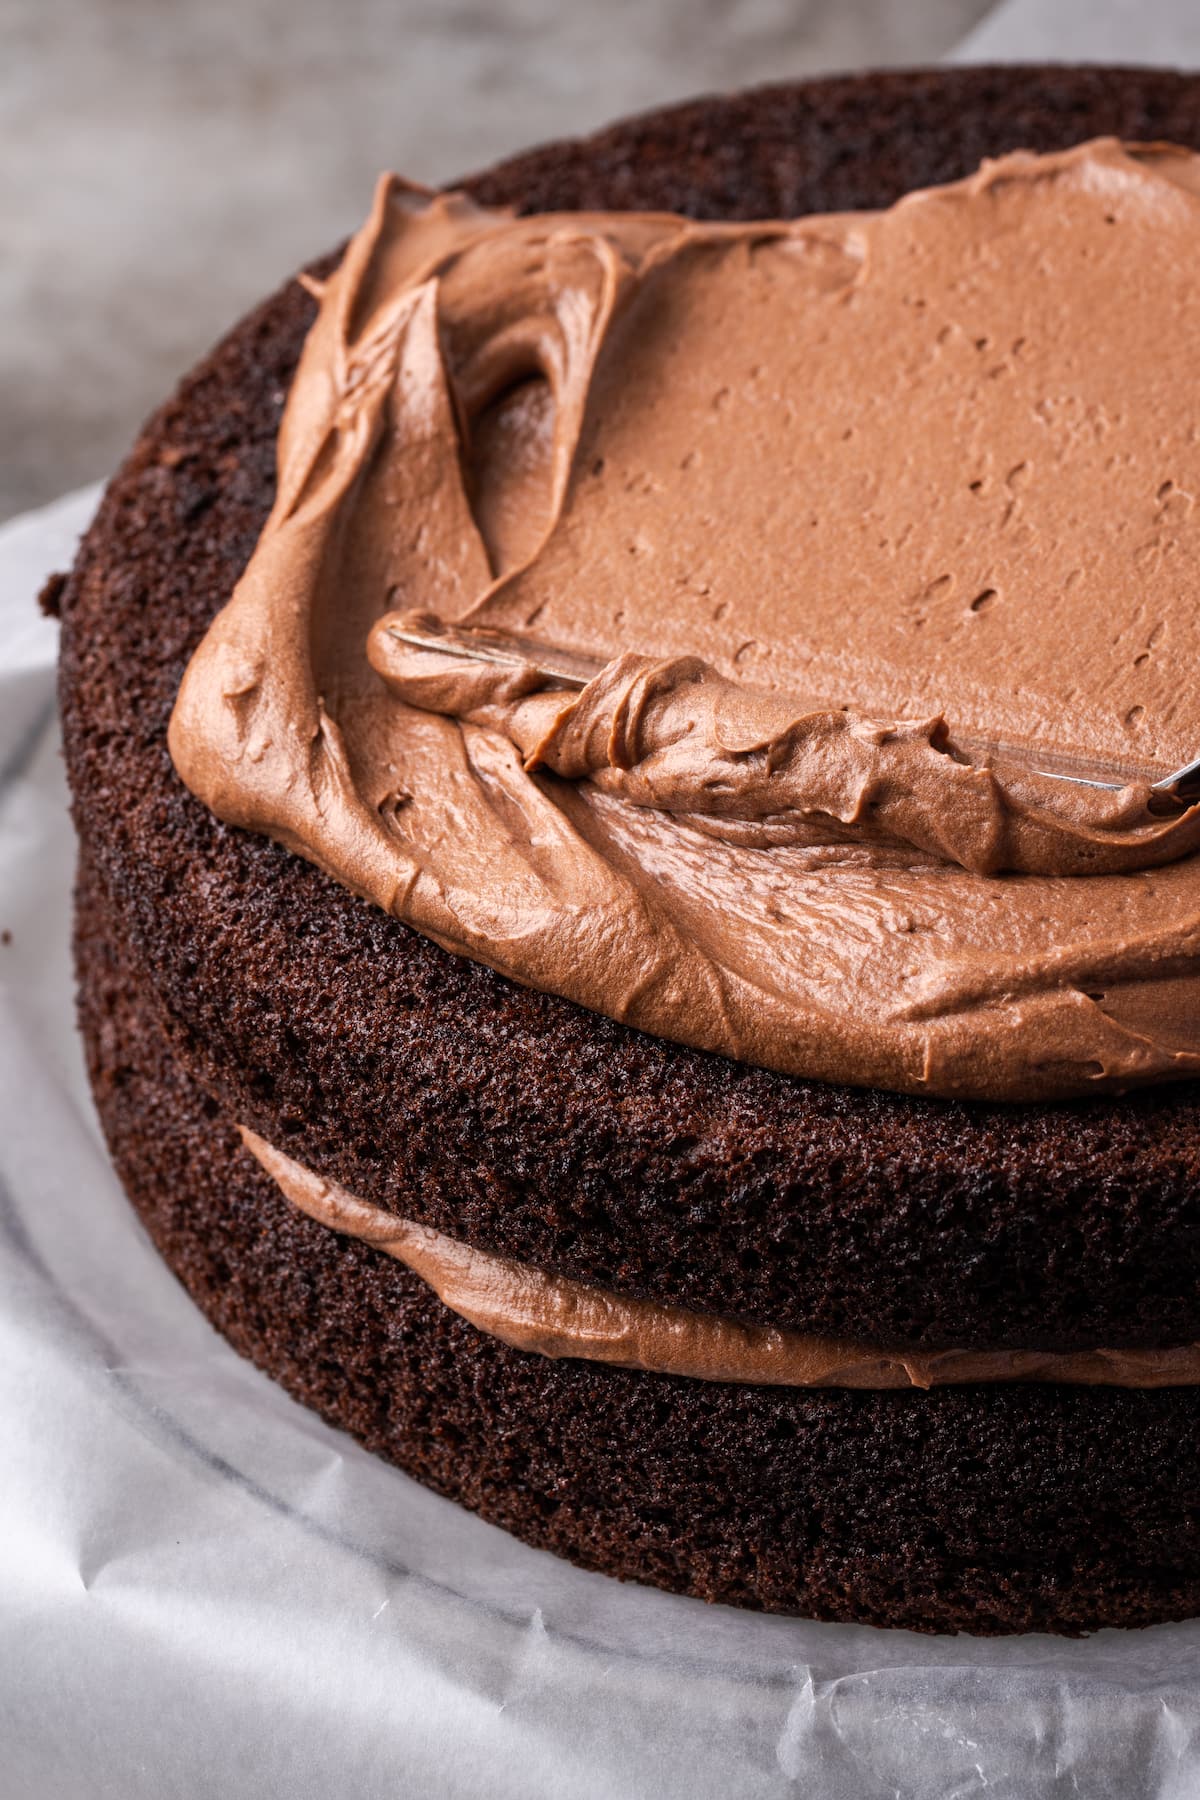 Chocolate frosting spread over a chocolate layer cake.